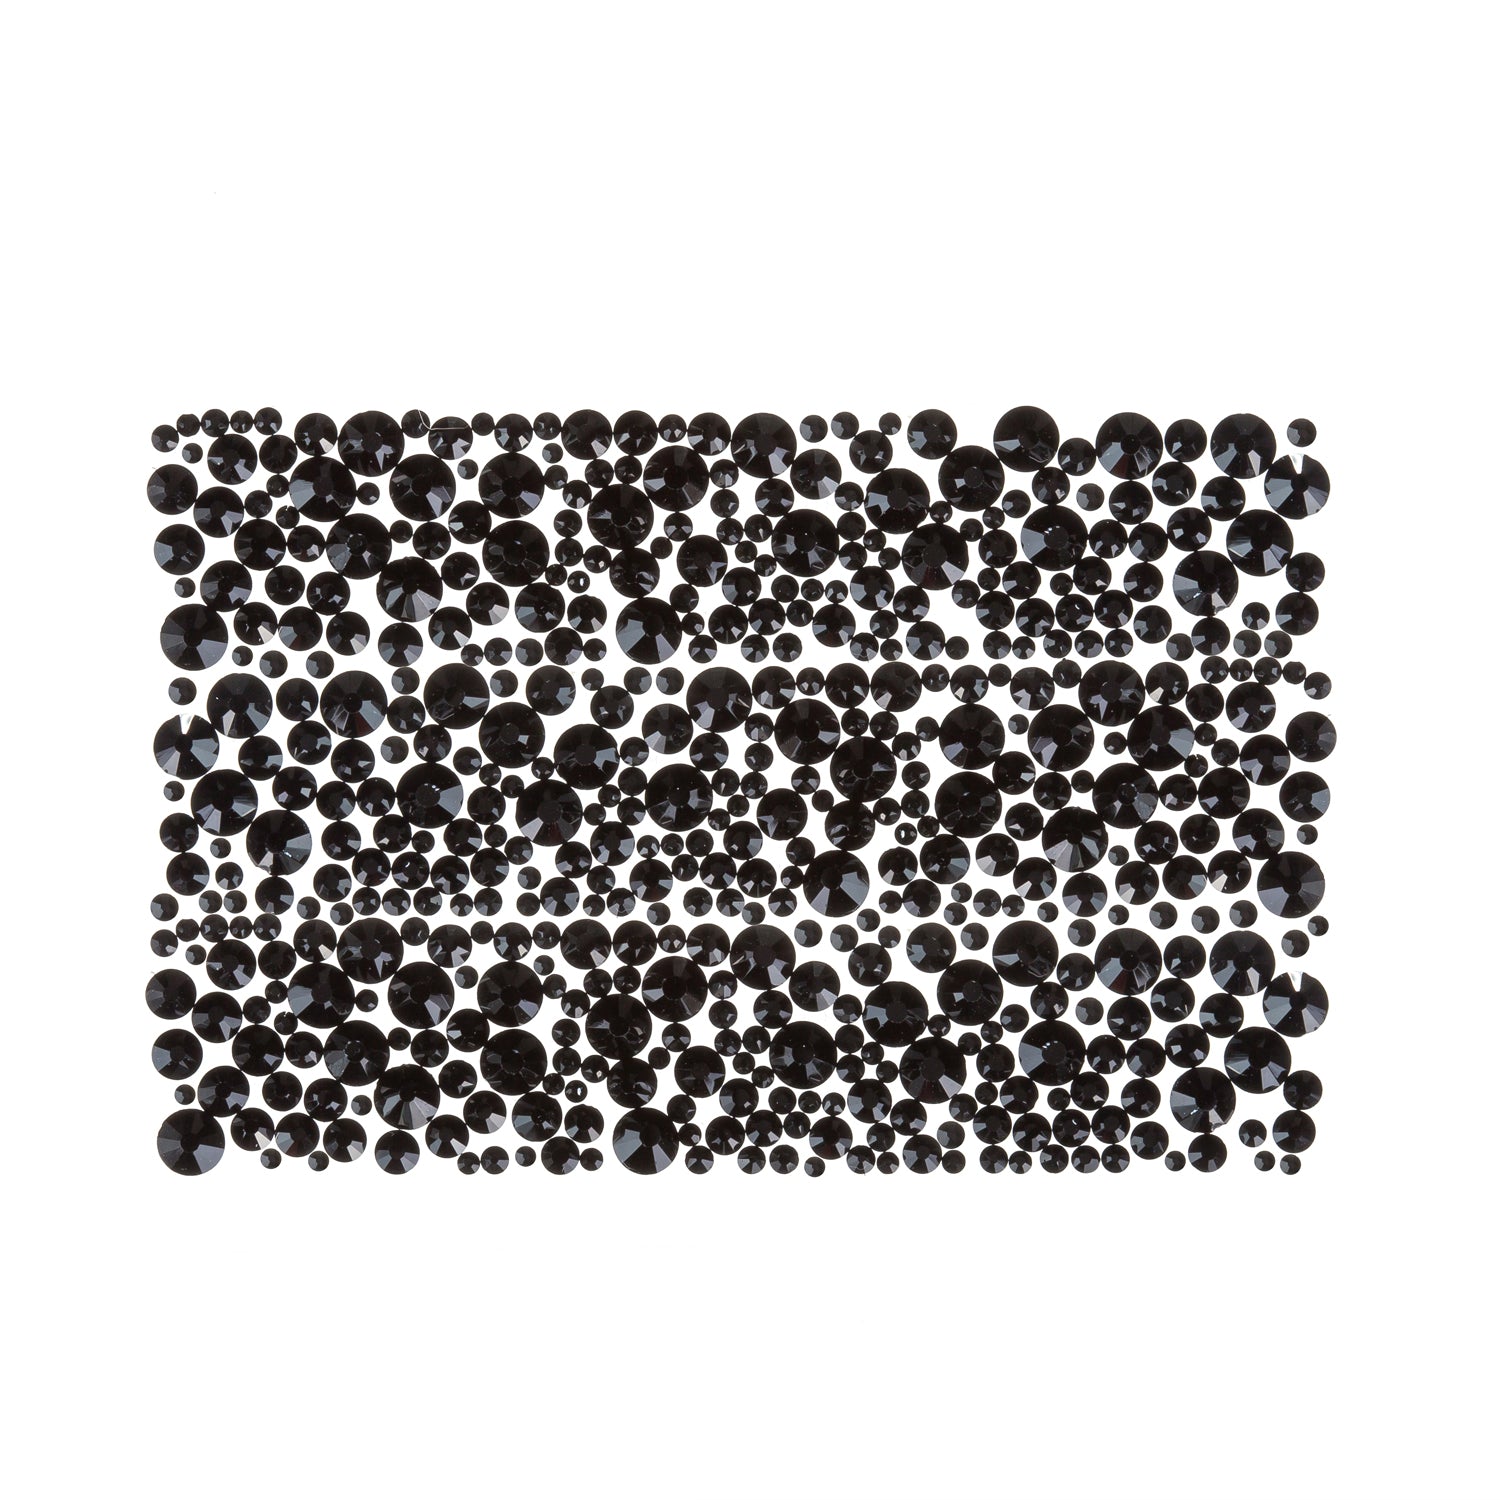 Zealer 1800pcs Crystals Black Nail Art Rhinestones Round Beads Top Grade Flatback Glass Charms Gems Stones for Nails Decoration Crafts Eye Makeup Clothes Shoes 300pcs Each (Mix SS3 6 10 12 16 20) - Zealer